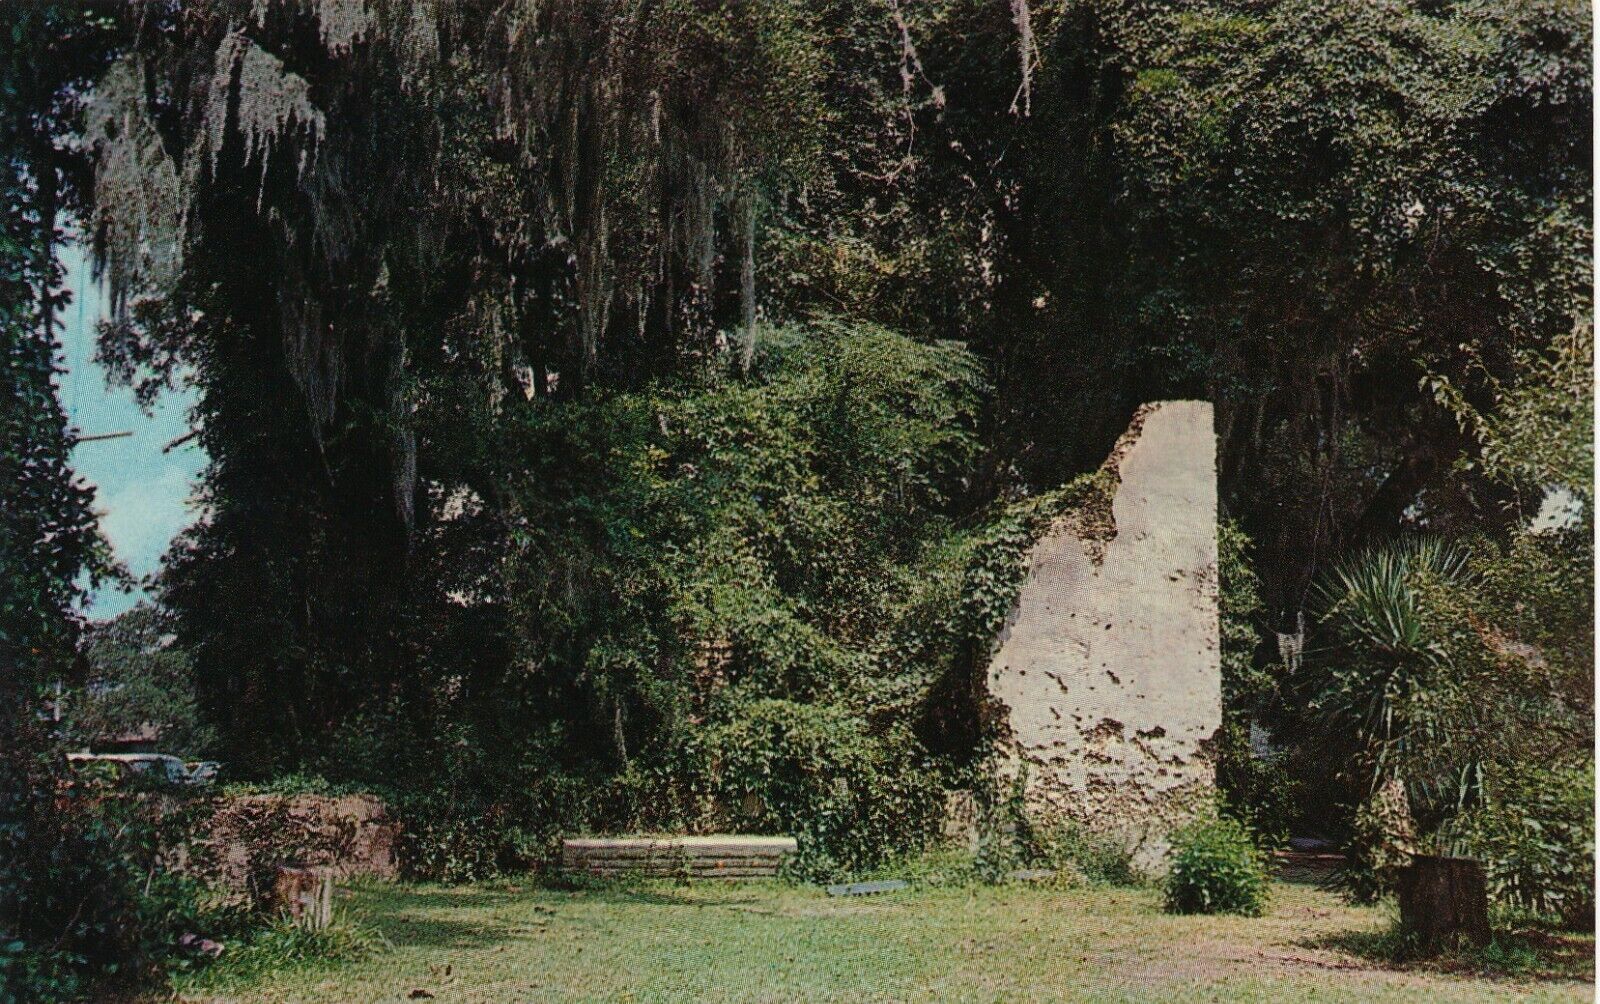 Ruins of the Slave Hospital at St. Simons Island, Georgia vintage unposted